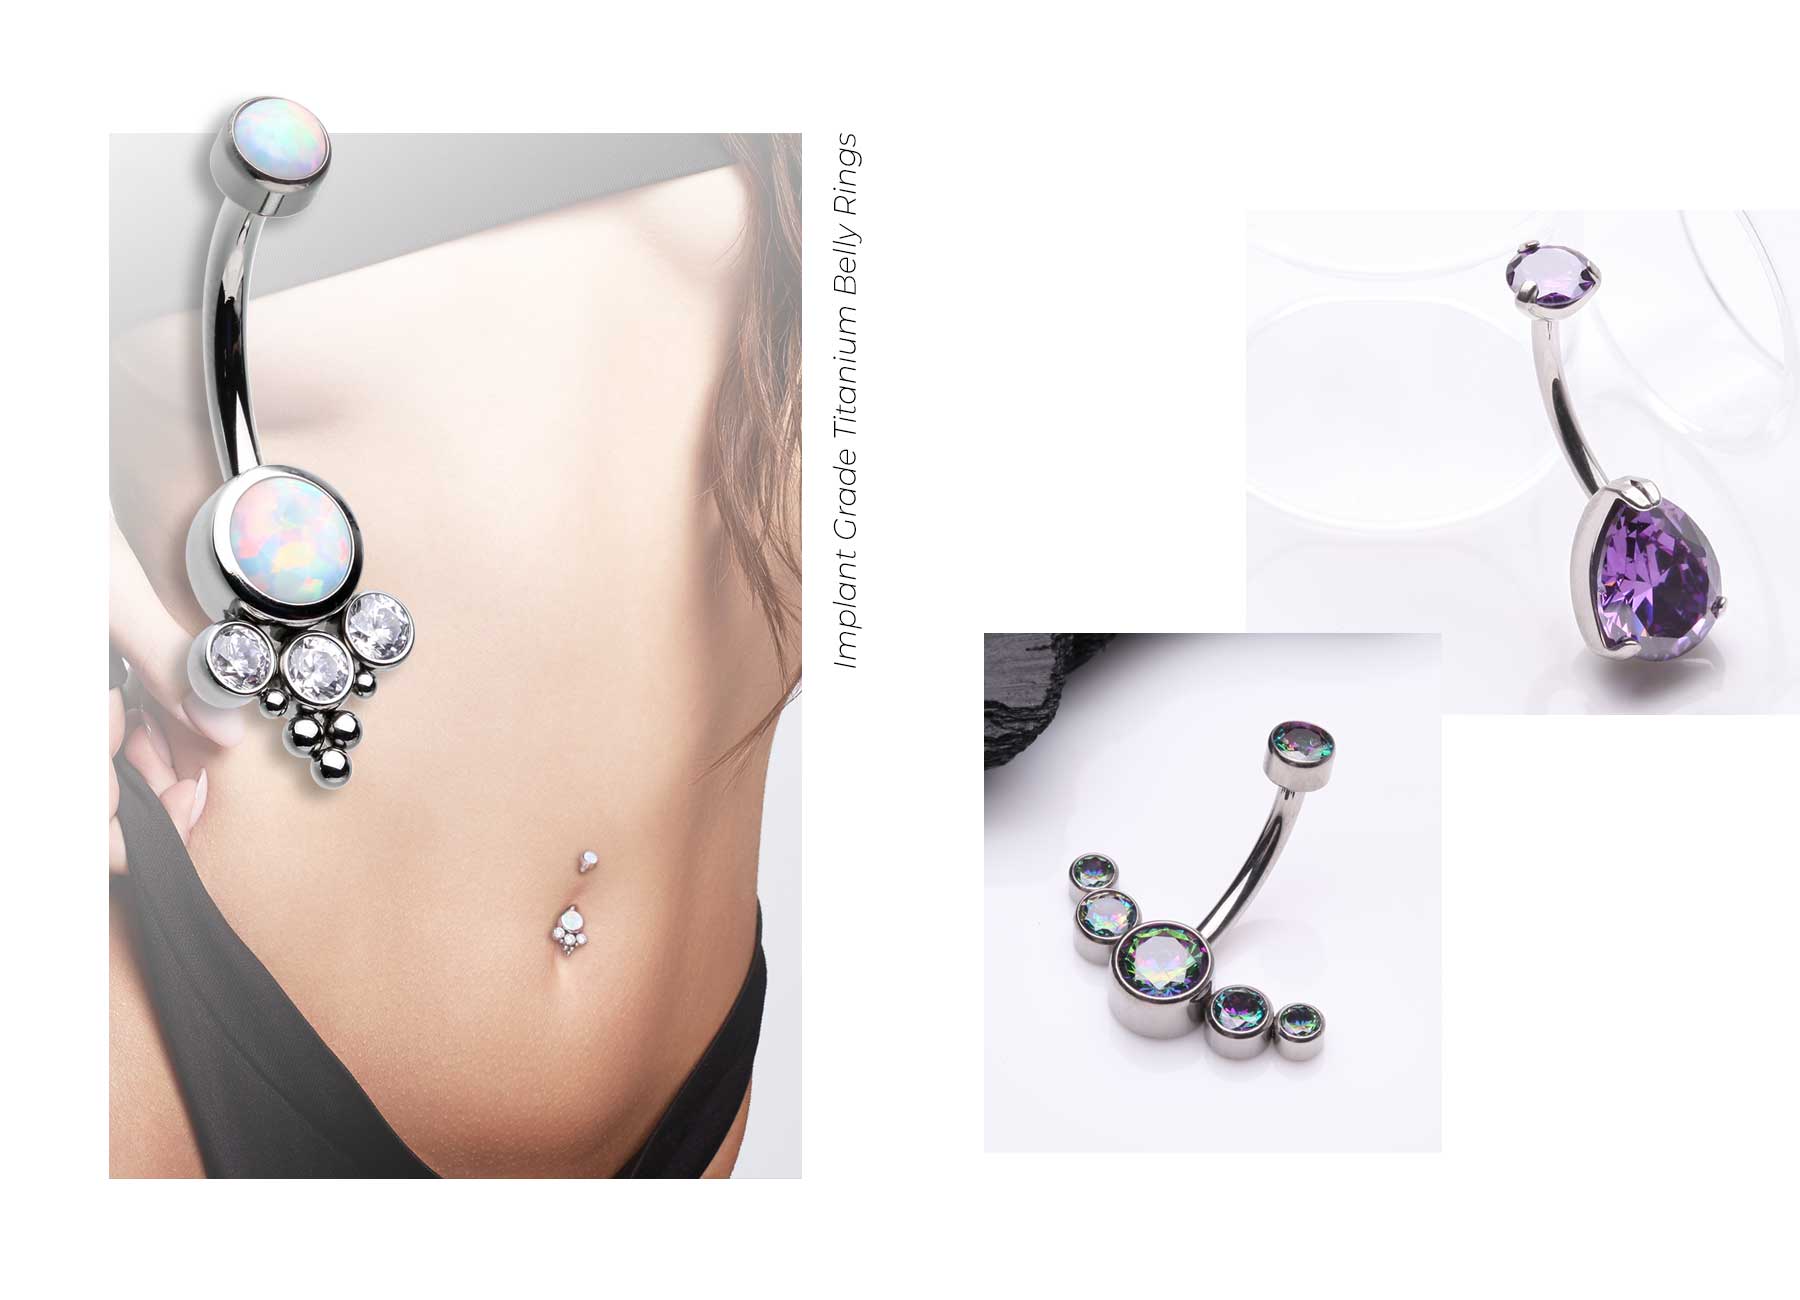 Custom Handmade Stainless Steel Belly Button Piercings With